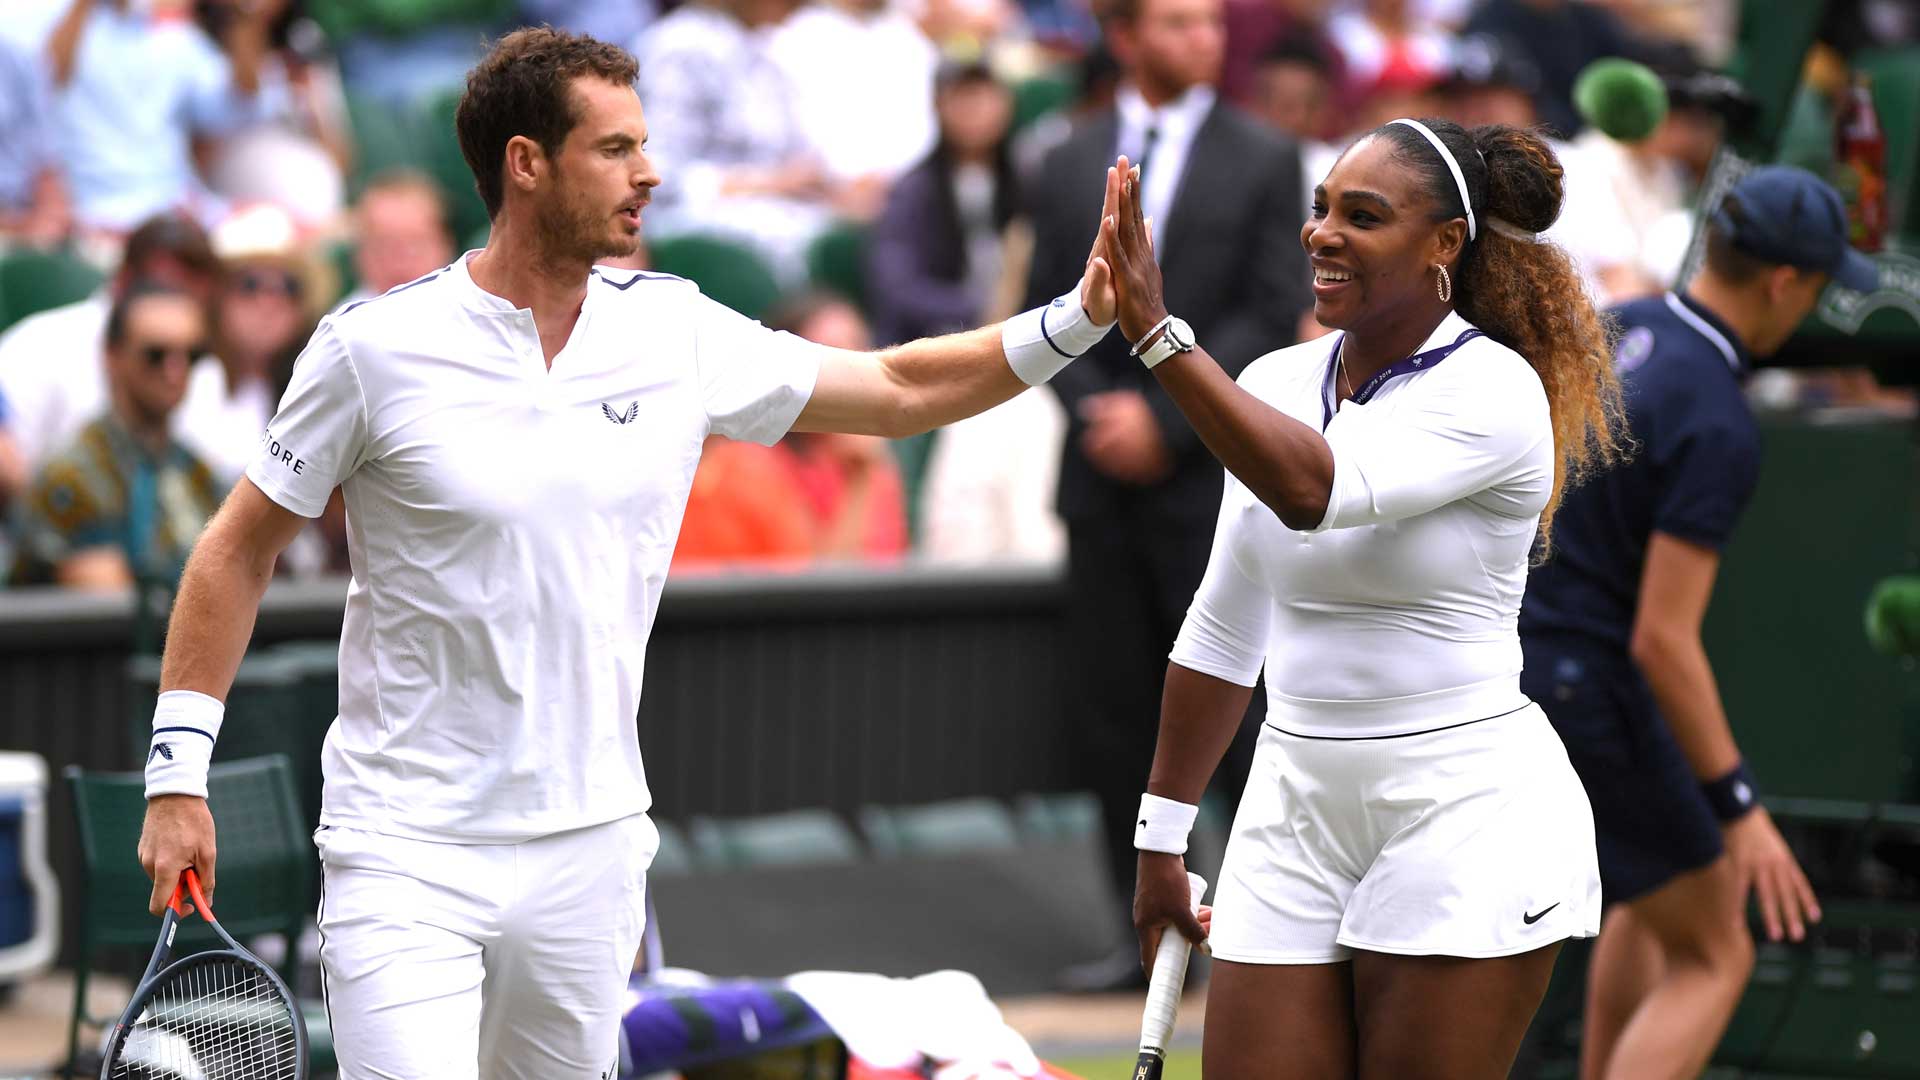 a href='https://www.atptour.com/en/players/andy-murray/mc10/overview'Andy Murray/a, Serena Williams